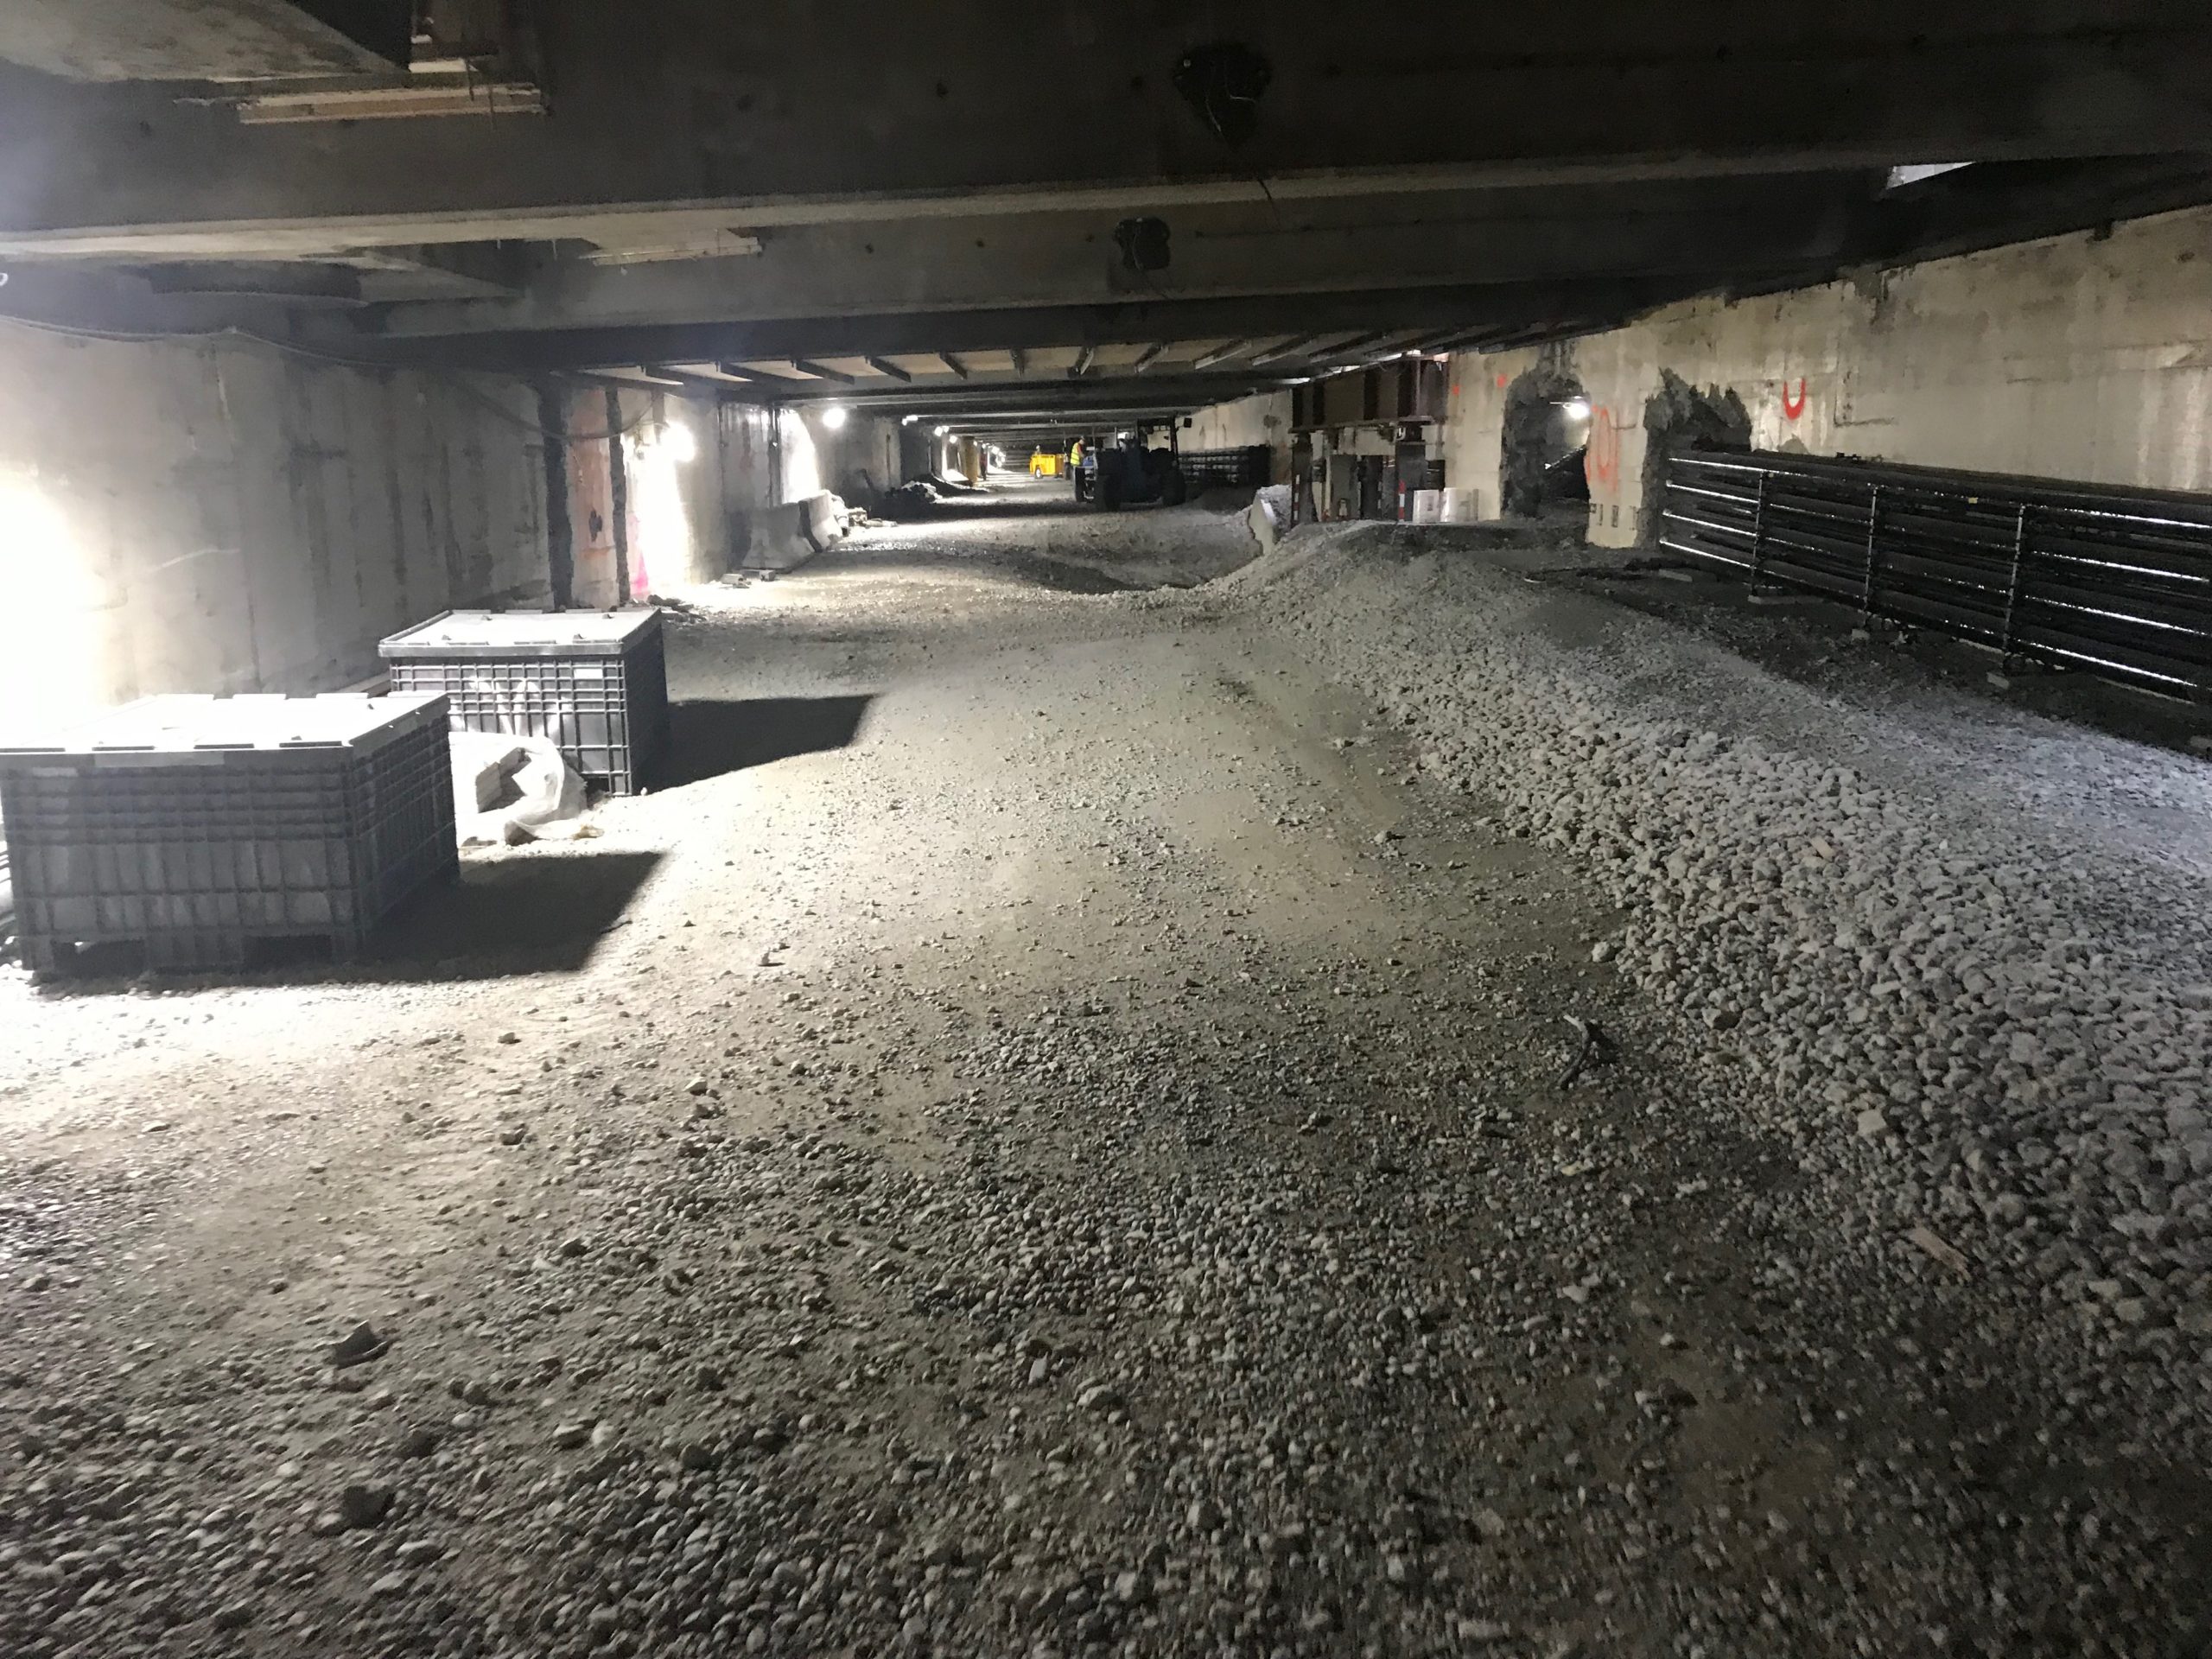 https://www.cell-crete.com/build/wp-content/uploads/2020/08/Seattle-Tunnel-23-scaled.jpg